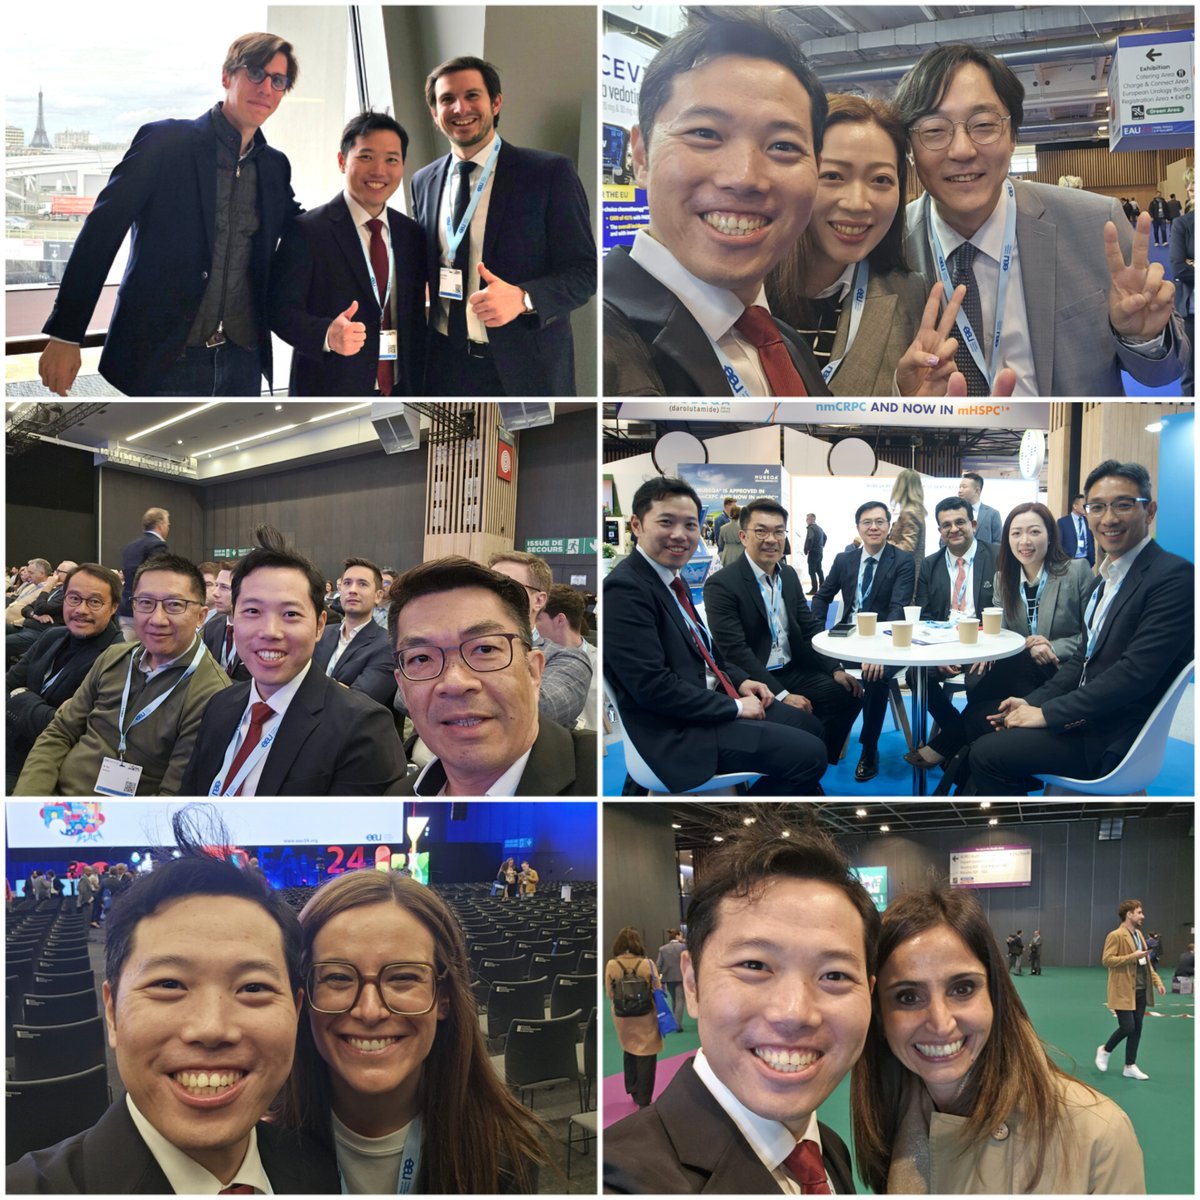 Exciting first day at #EAU24! Starting off with awesome Endourology sessions, and meeting friends! @exkeller @ameliapietr1 @kmoretry @albasierrad @eug20miglia @emiliani_e @fpanthier @steffiyuen @UrologyTiong @vturodynamic @DocGauhar @sproietti81 @DrRaymondKo @EndoLuminalEndo